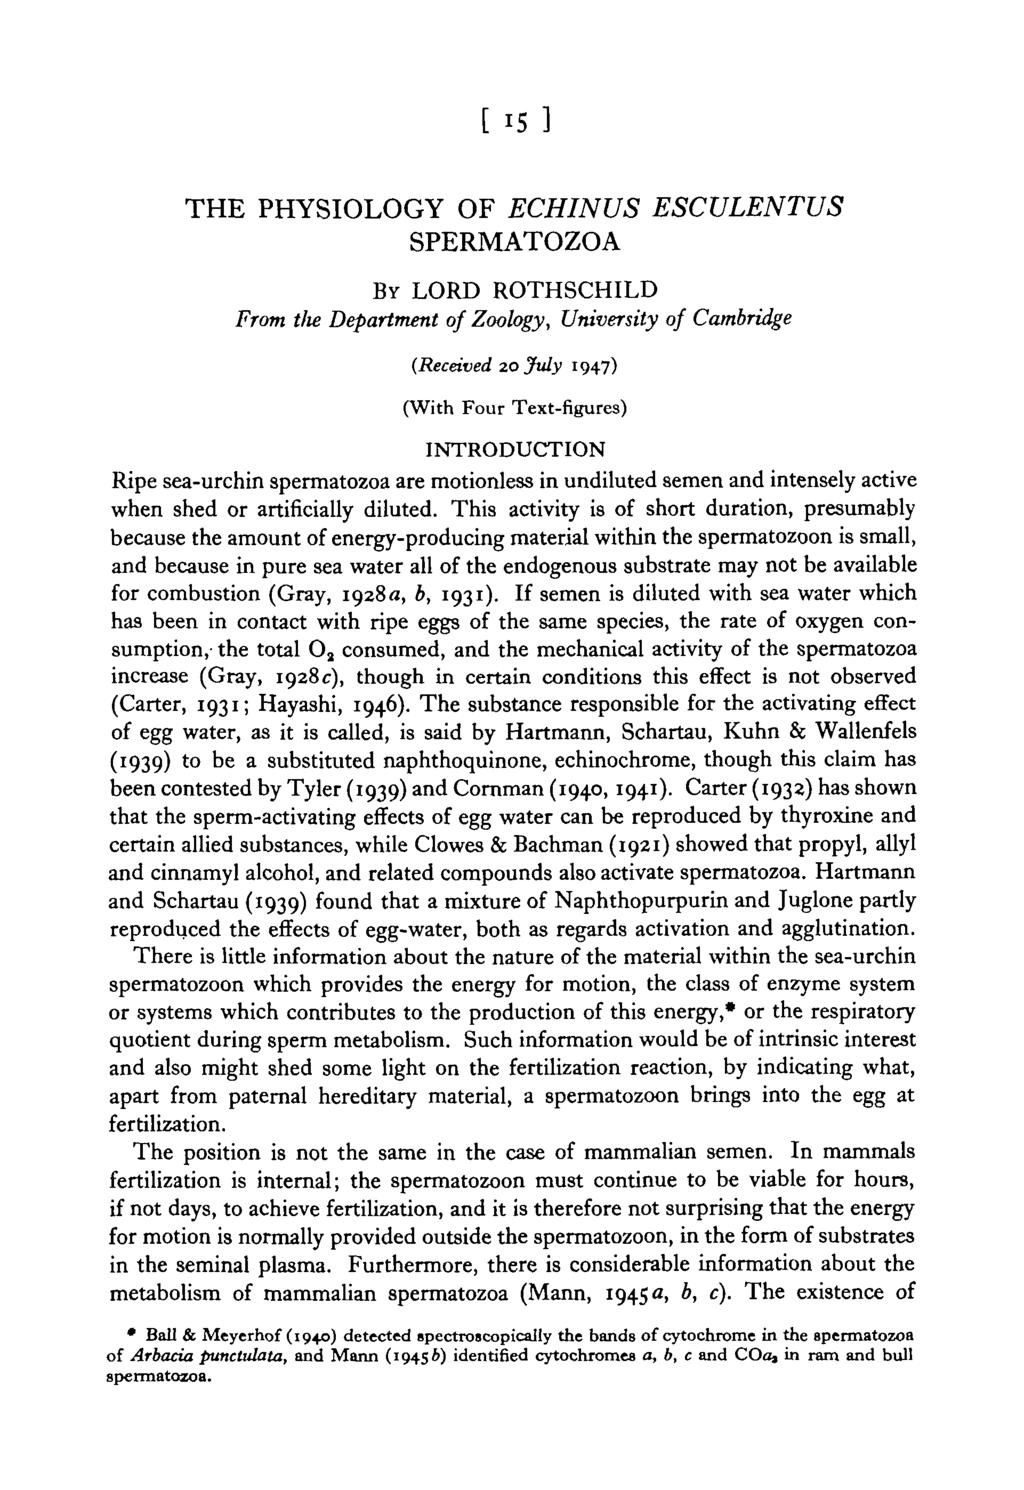 THE PHSIOLOG OF ECHINUS SPERMTOZO ESCULENTUS B LORD ROTHSCHILD From tlie Department of Zoolog, Universit of Cambridge (Received 20 Jul 1947) (With Four Text-figures) INTRODUCTION Ripe sea-urchin